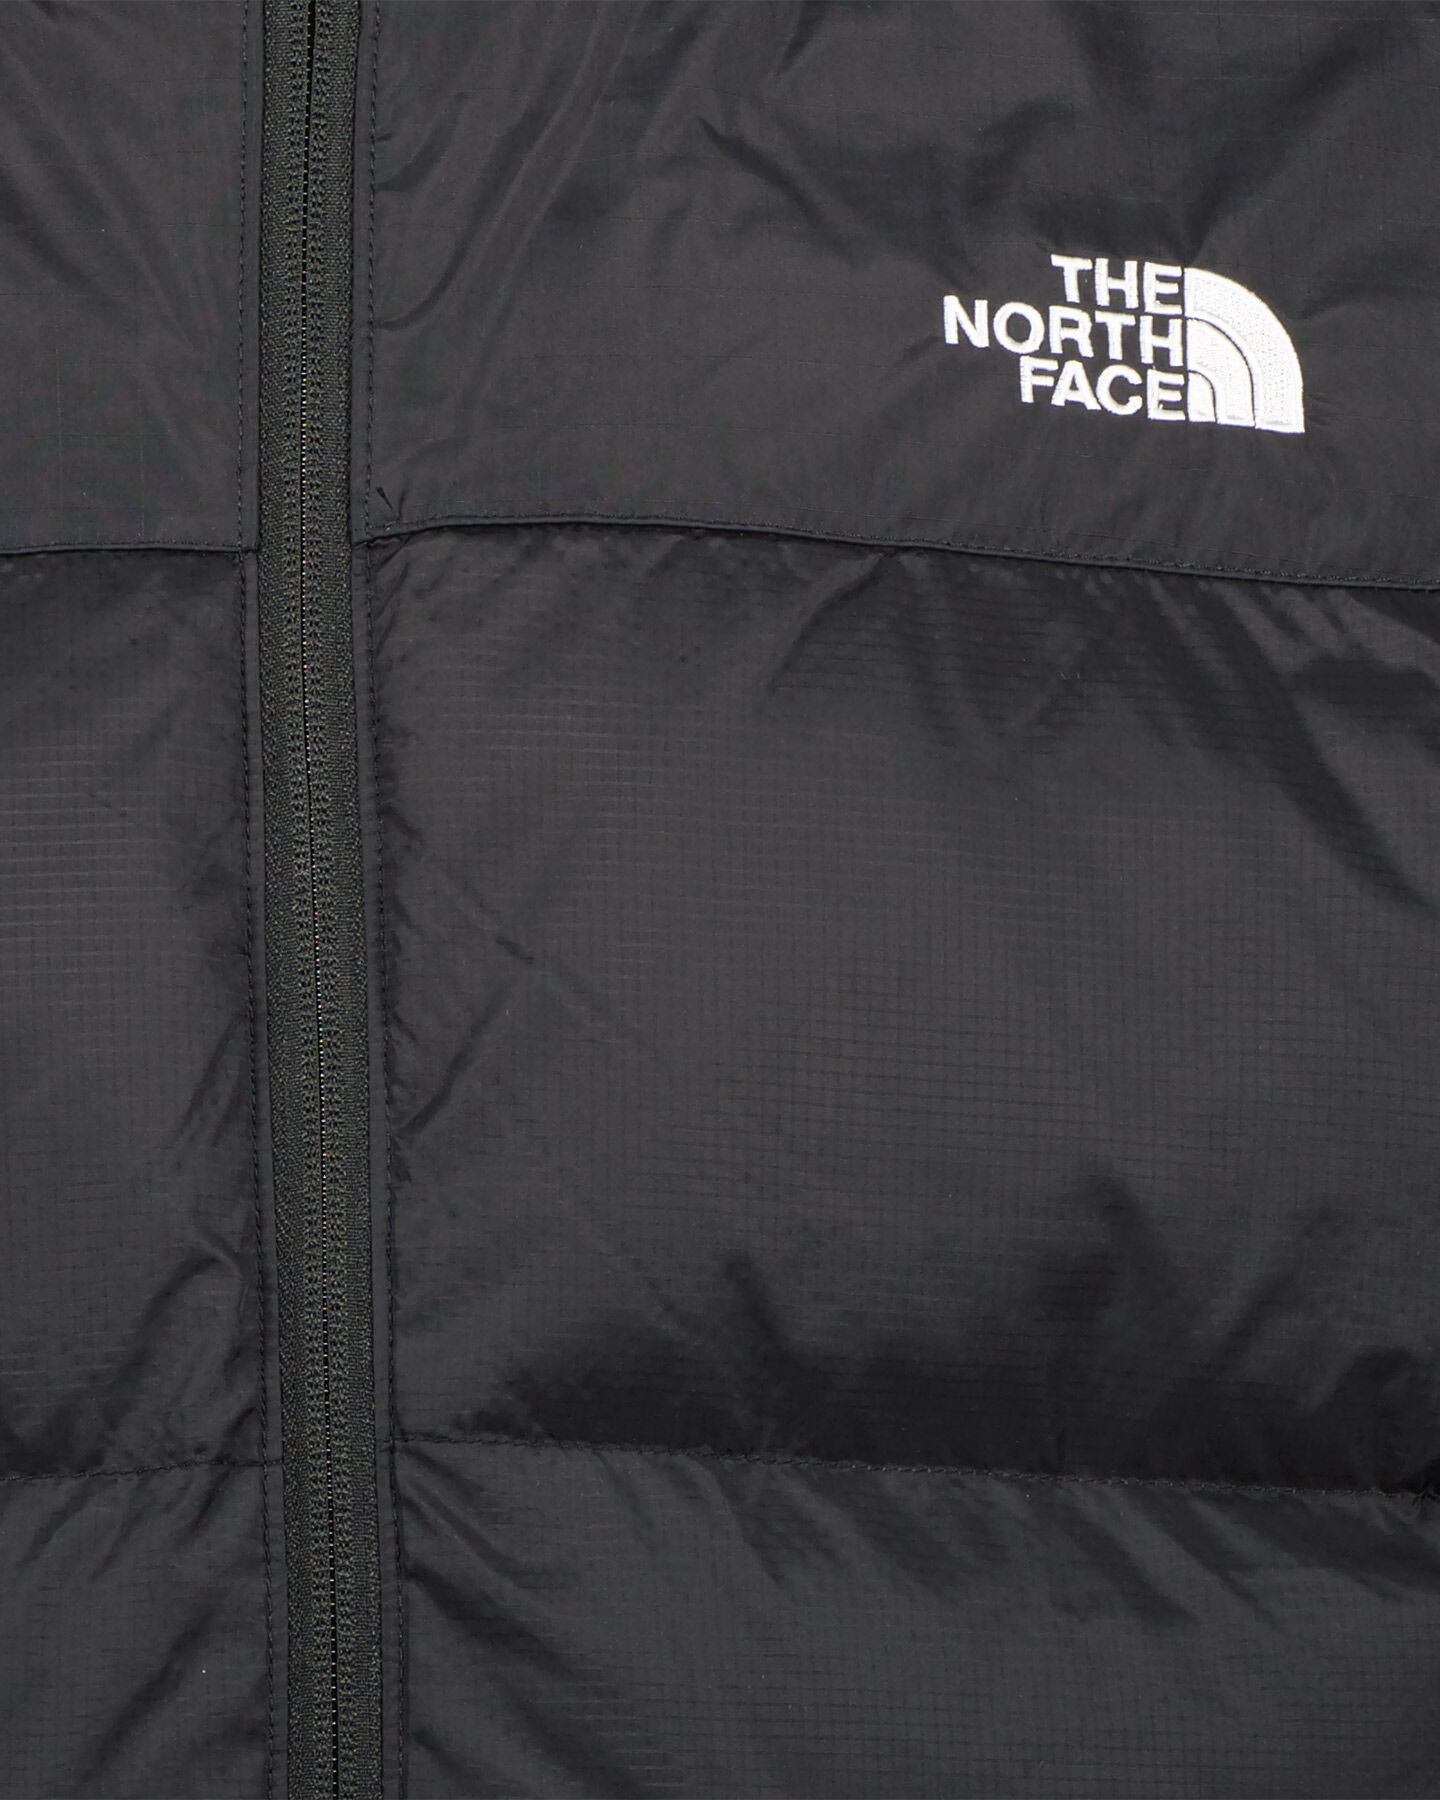  Giacca THE NORTH FACE DIABLO QWN HOOD  M S5242957 scatto 3